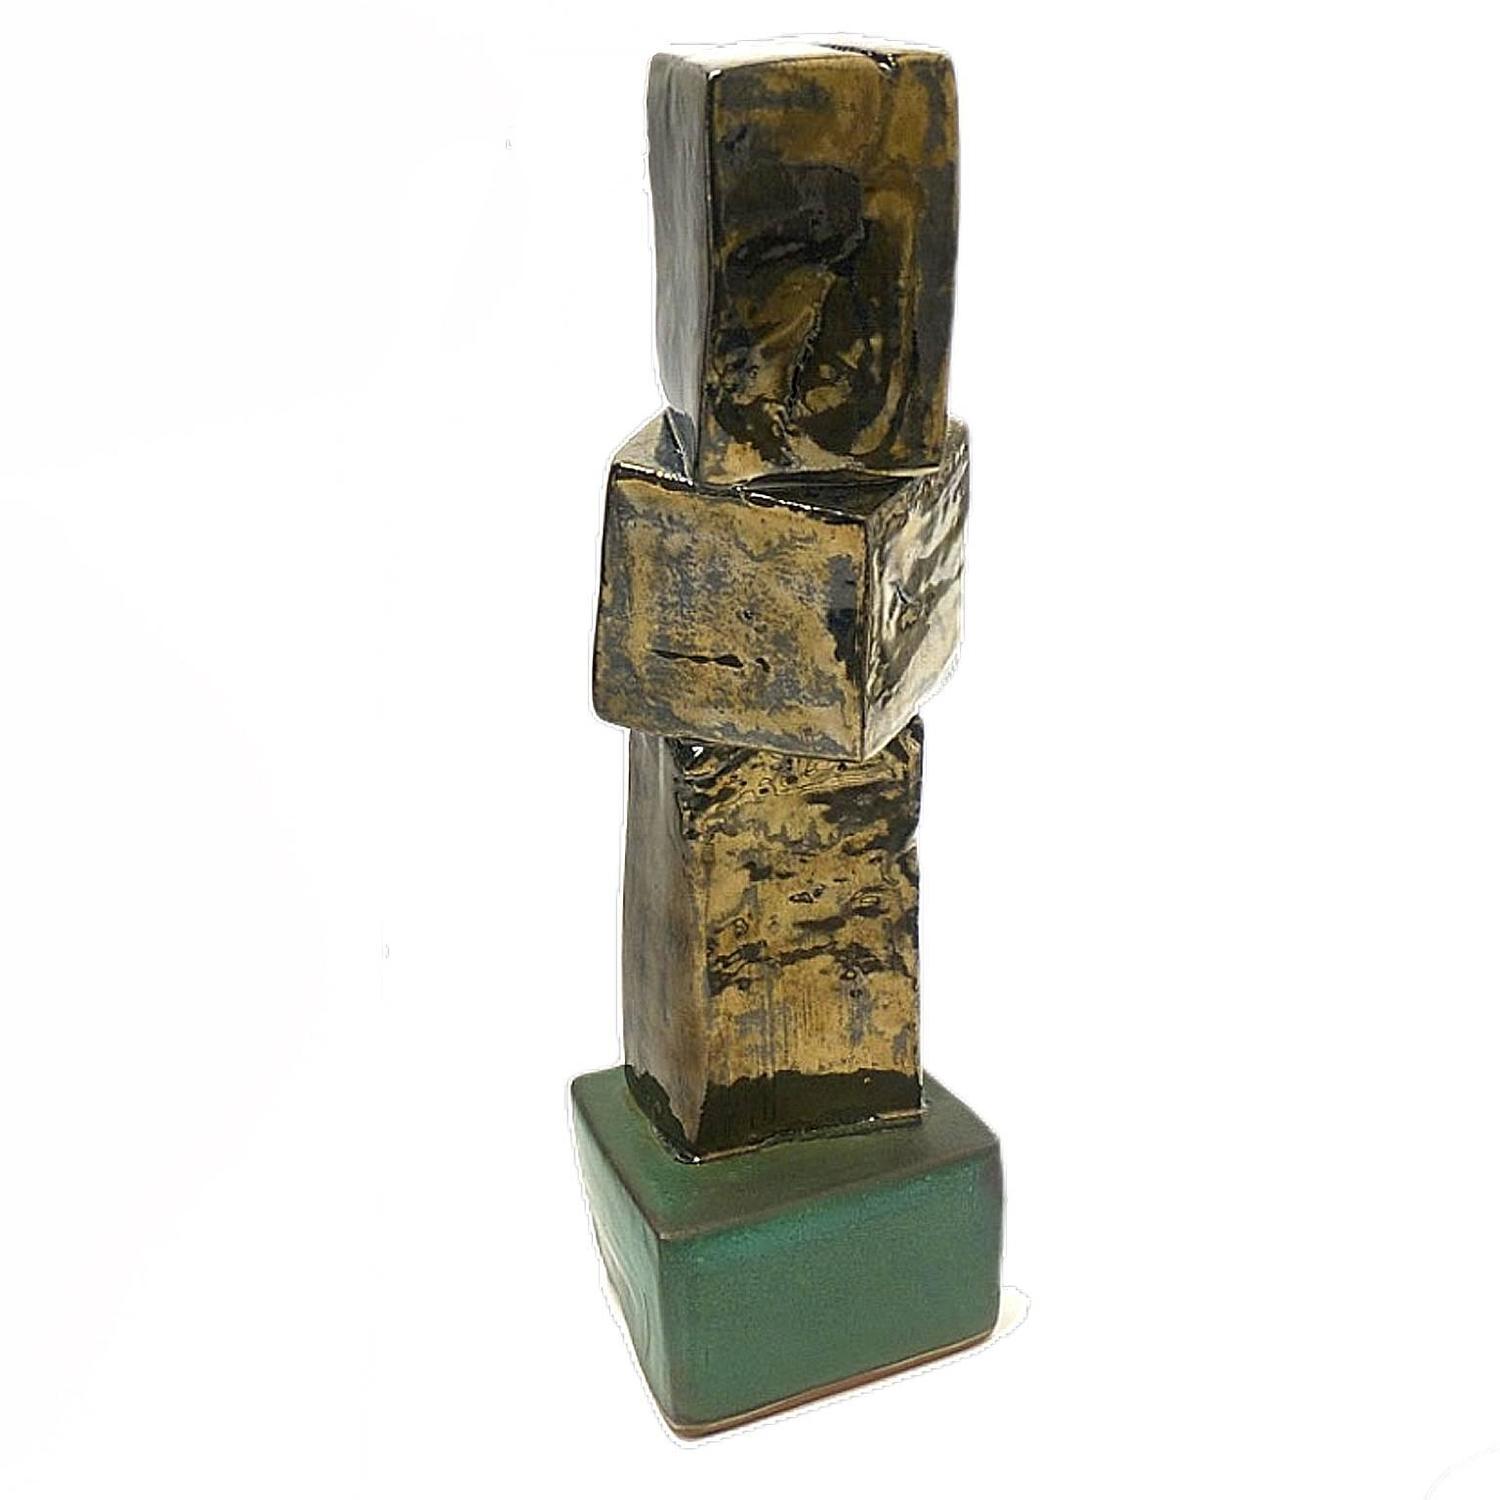 Ceramic Sculpture by Judy Engel For Sale at 1stdibs